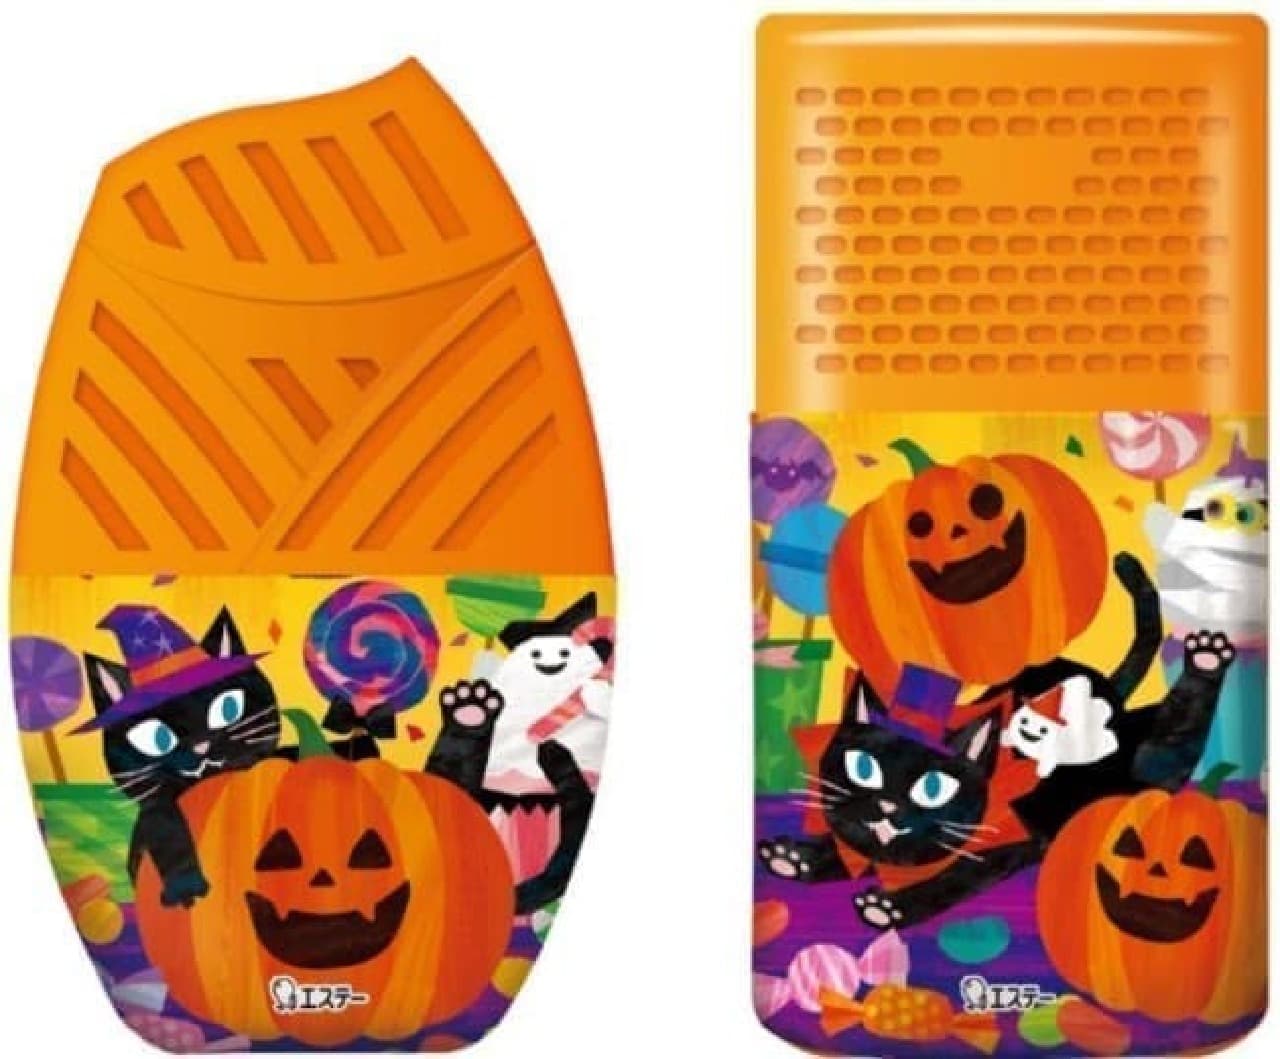 St. "Deodorant Power" Halloween Design This year too! With fruit candy scent